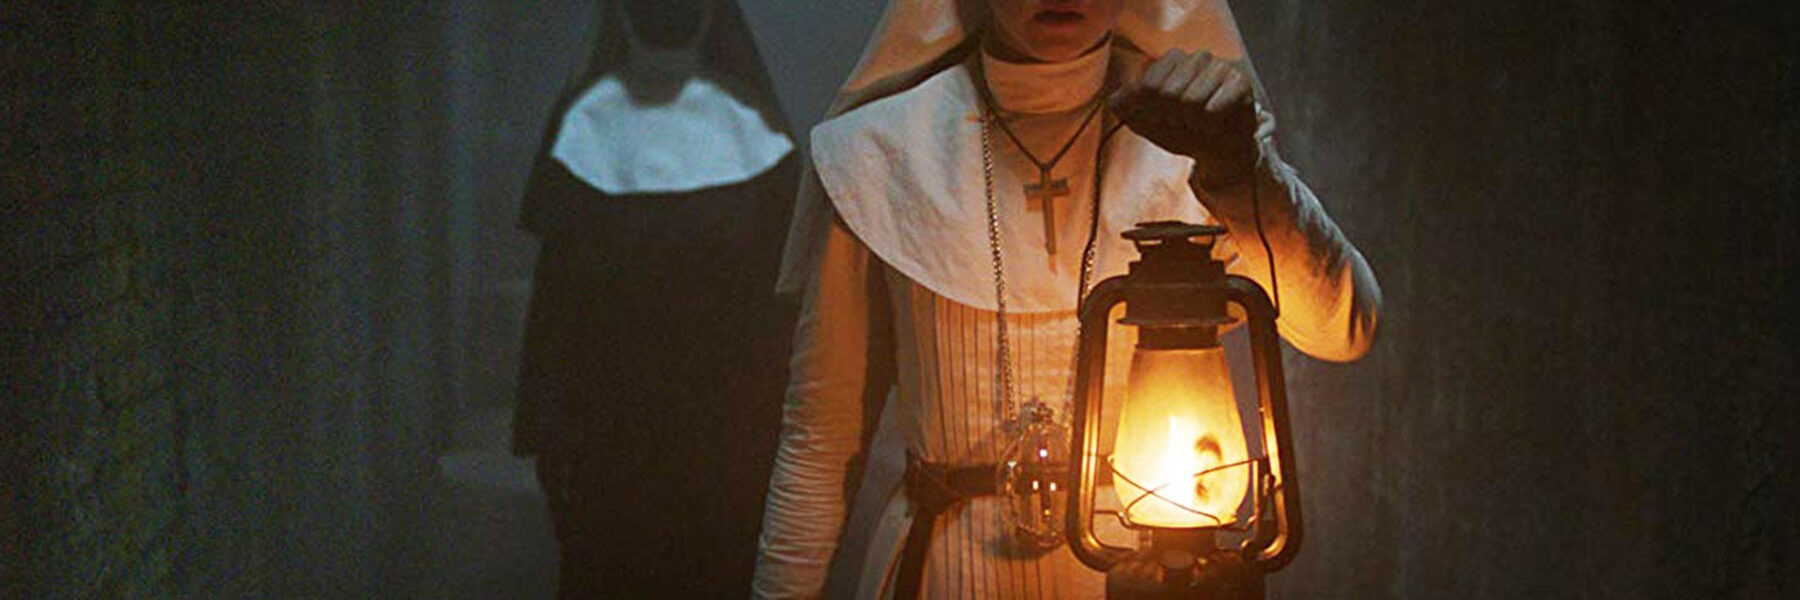 the nun review moviescope